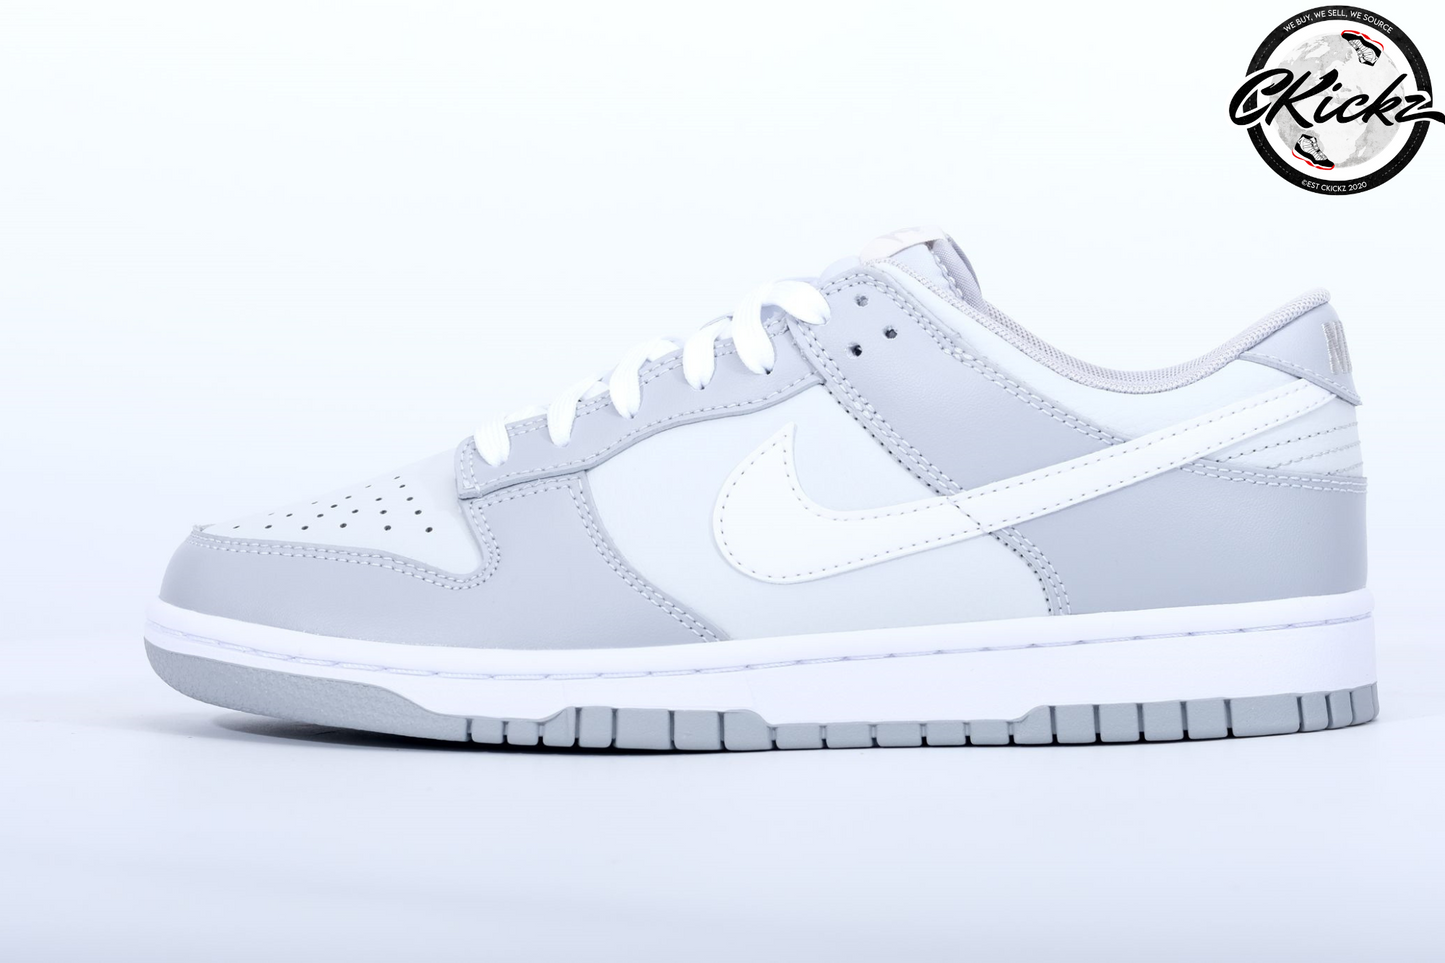 NK Dunk Low Two Tone Grey